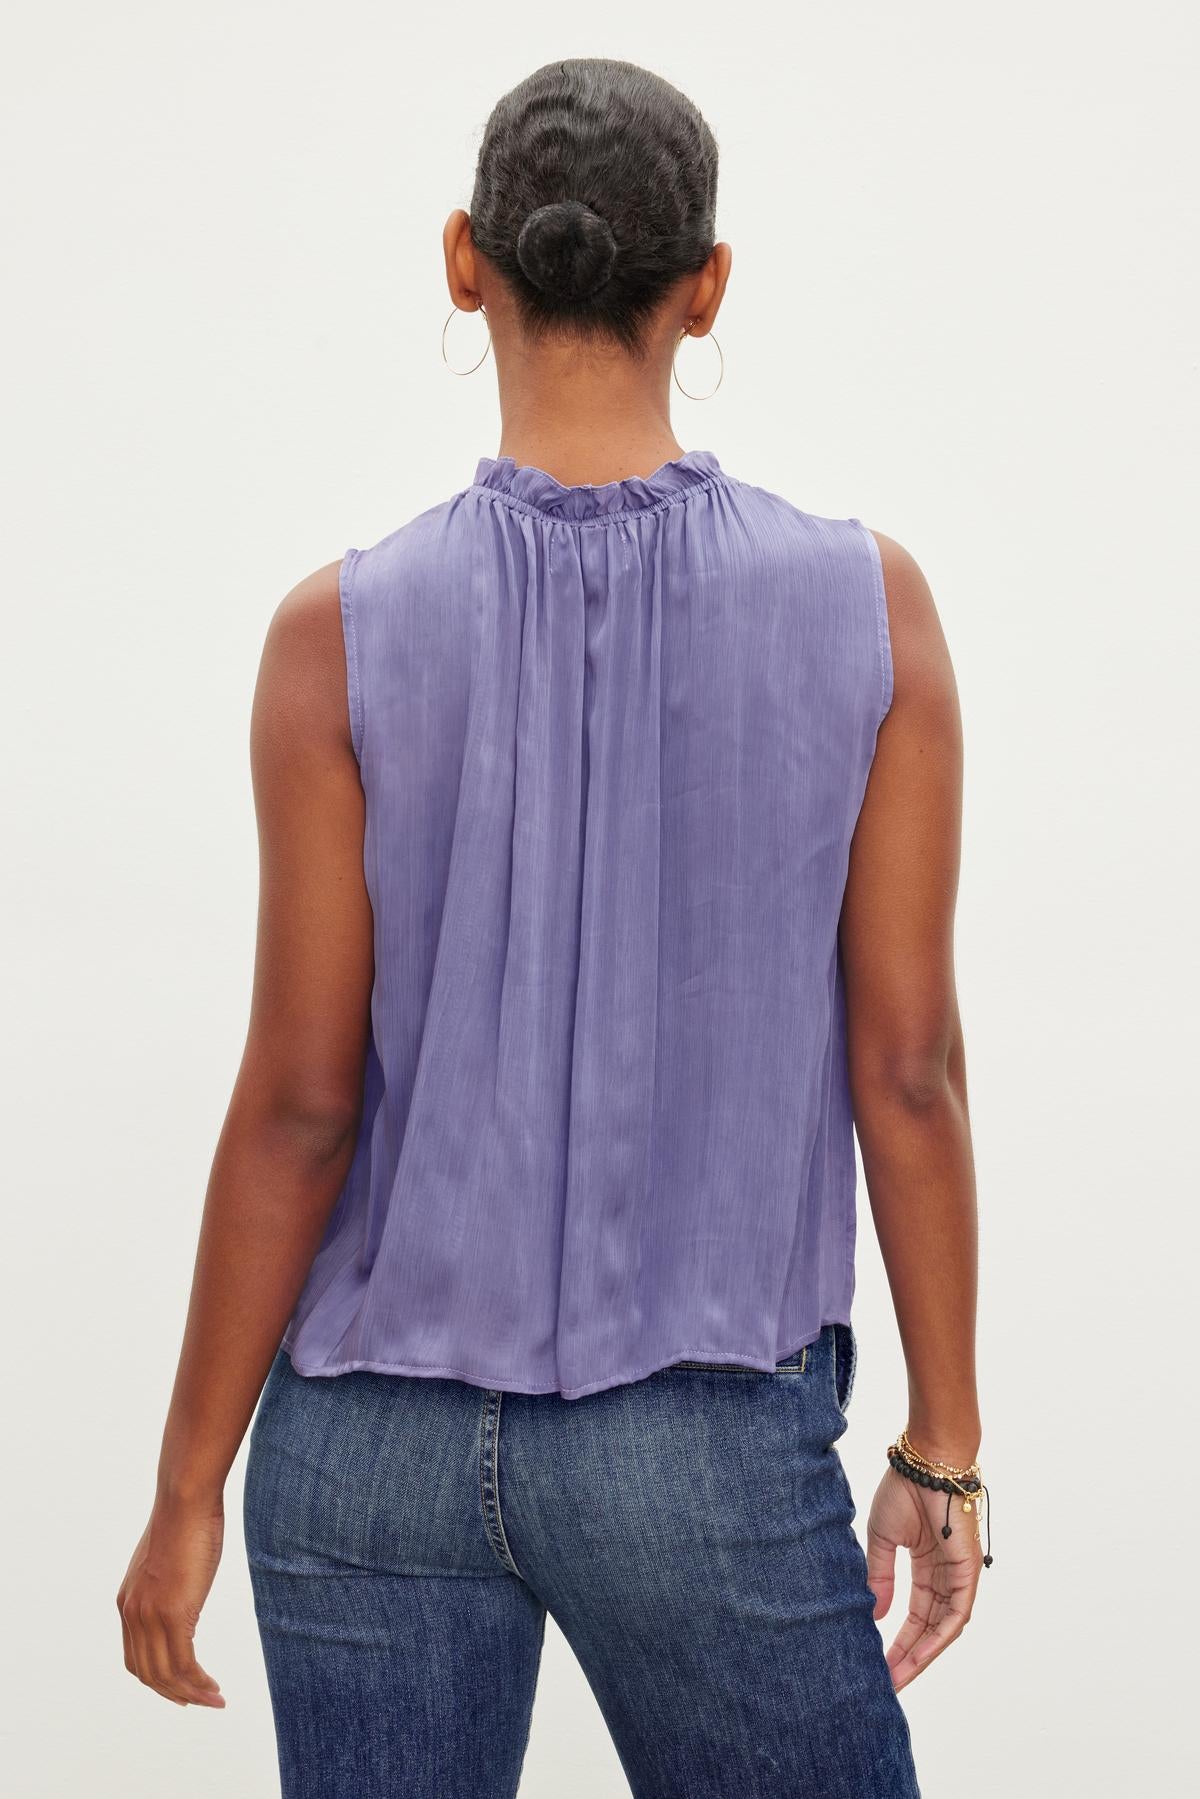   A person is wearing a purple KIANA RUFFLE NECK TANK TOP by Velvet by Graham & Spencer and blue jeans, photographed from the back. 